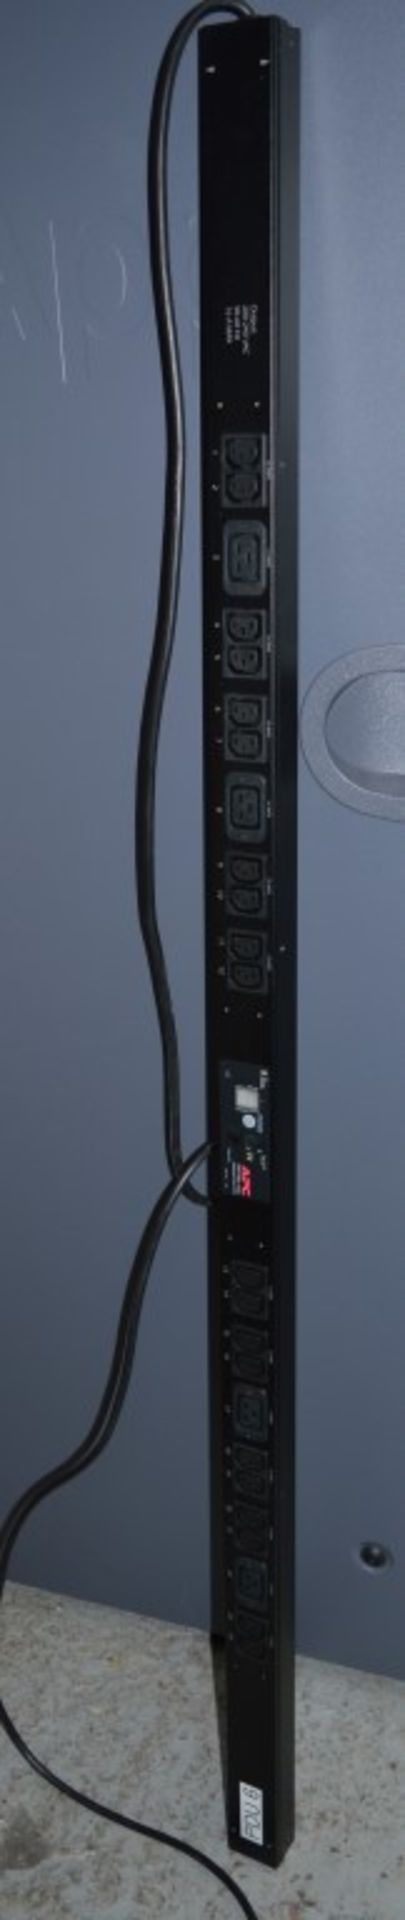 1 x APC Metered Rack PDU - Model AP7852 - 230V 16A - Features 24 Output Connectors - CL106 - Removed - Image 3 of 8